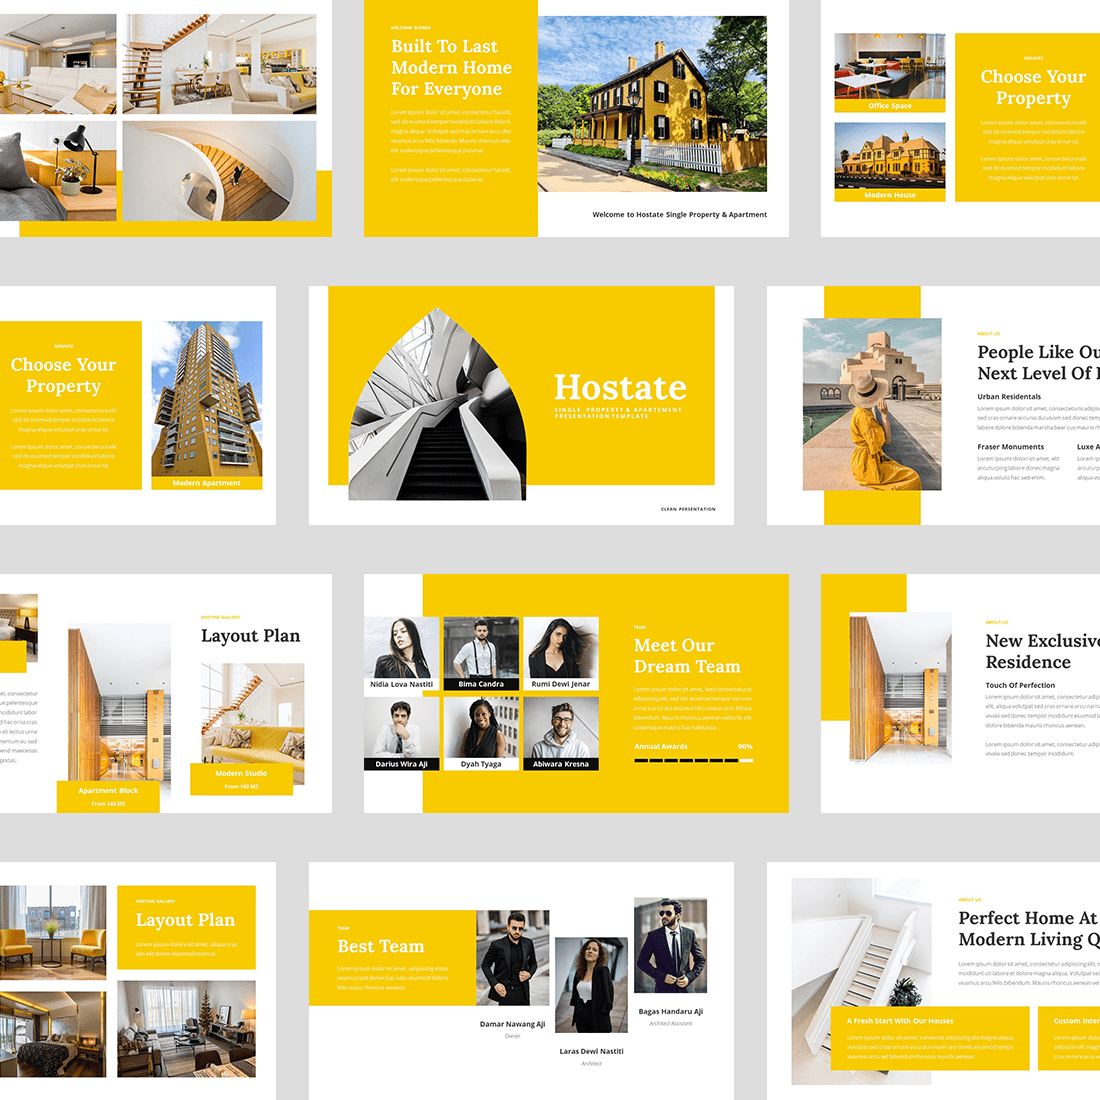 Hostate - Single Property & Apartment Google Slides Template preview image.